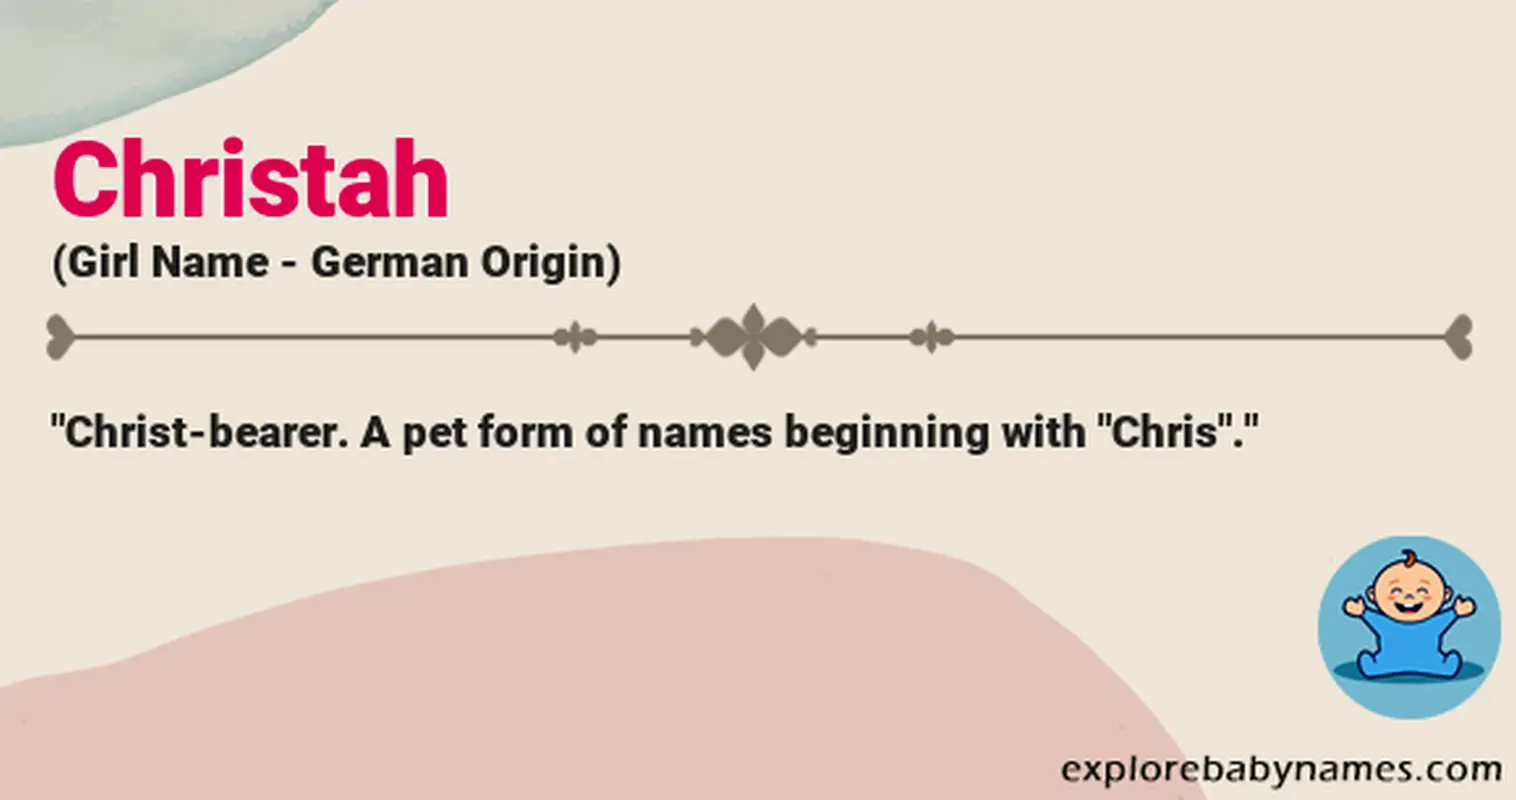 Meaning of Christah